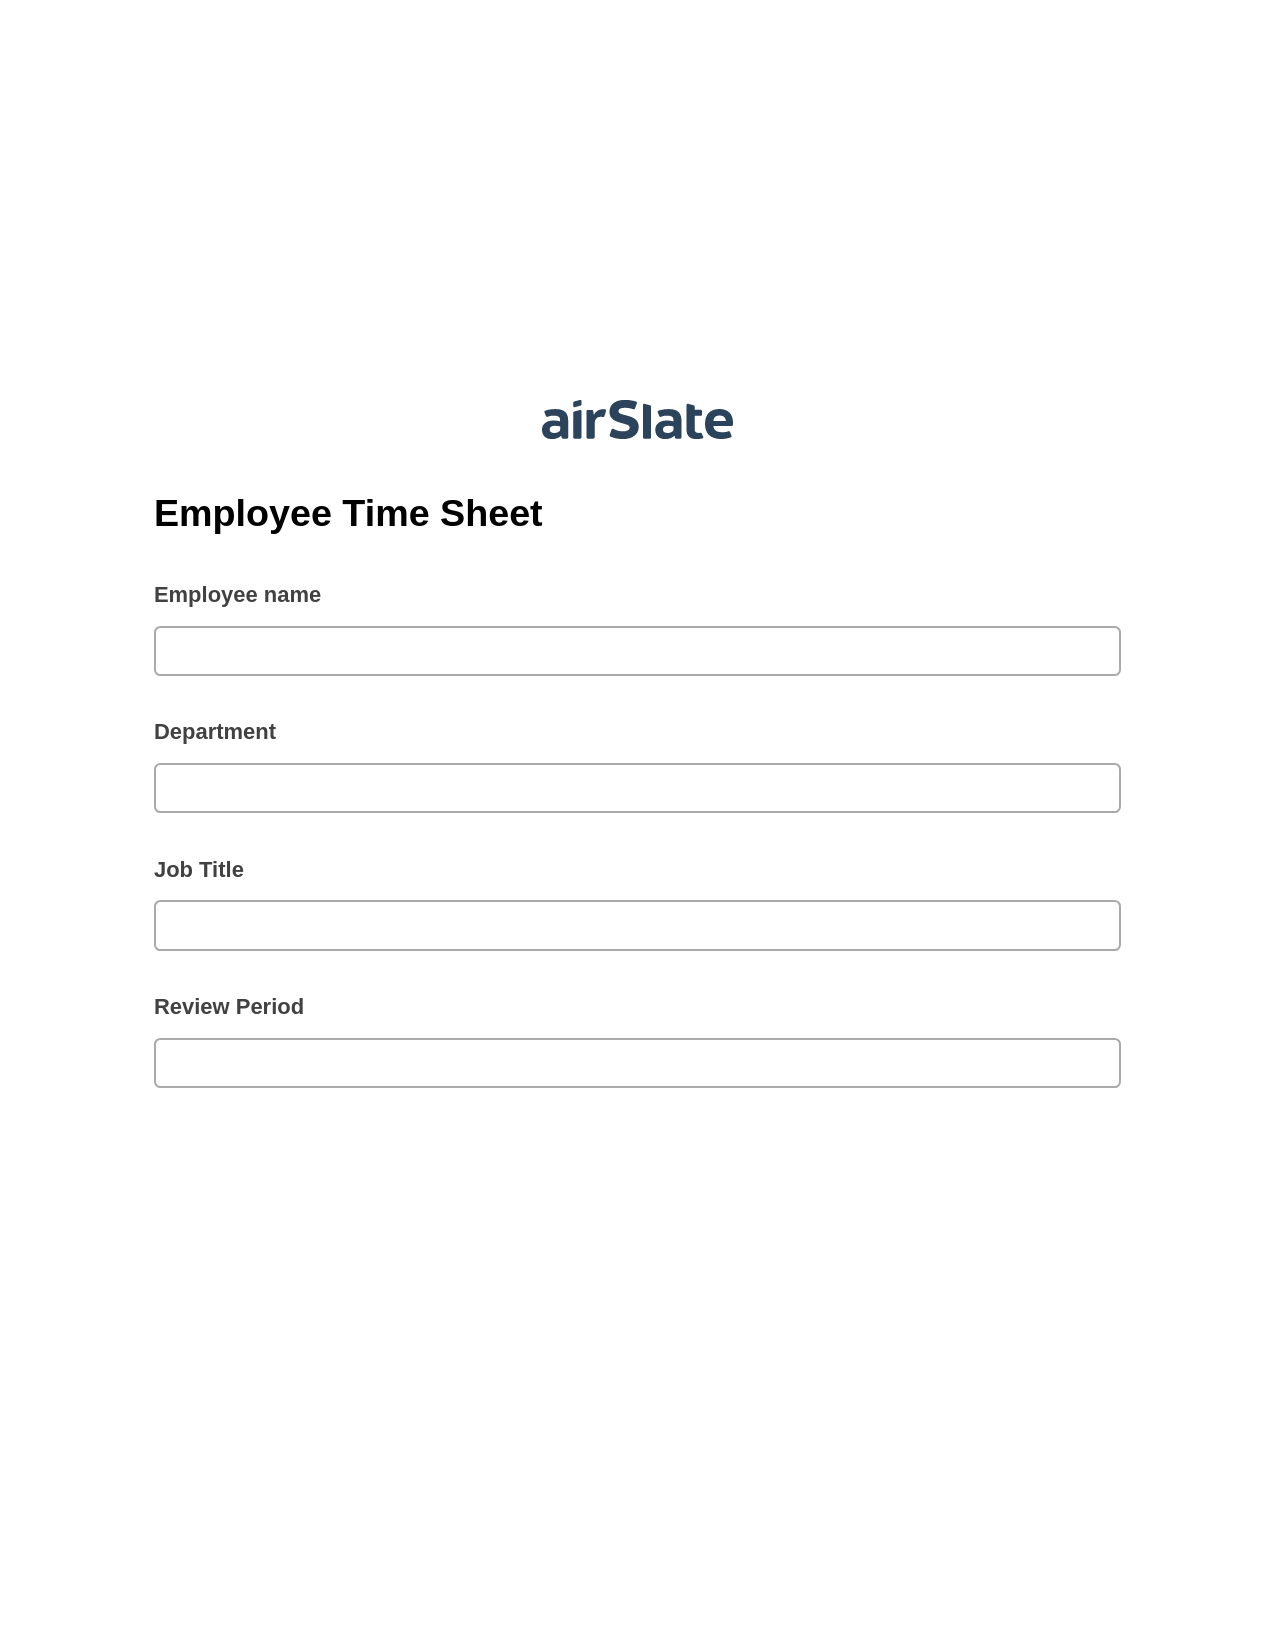 Employee Time Sheet Pre-fill from CSV File Bot, Create Salesforce Records Bot, Export to WebMerge Bot